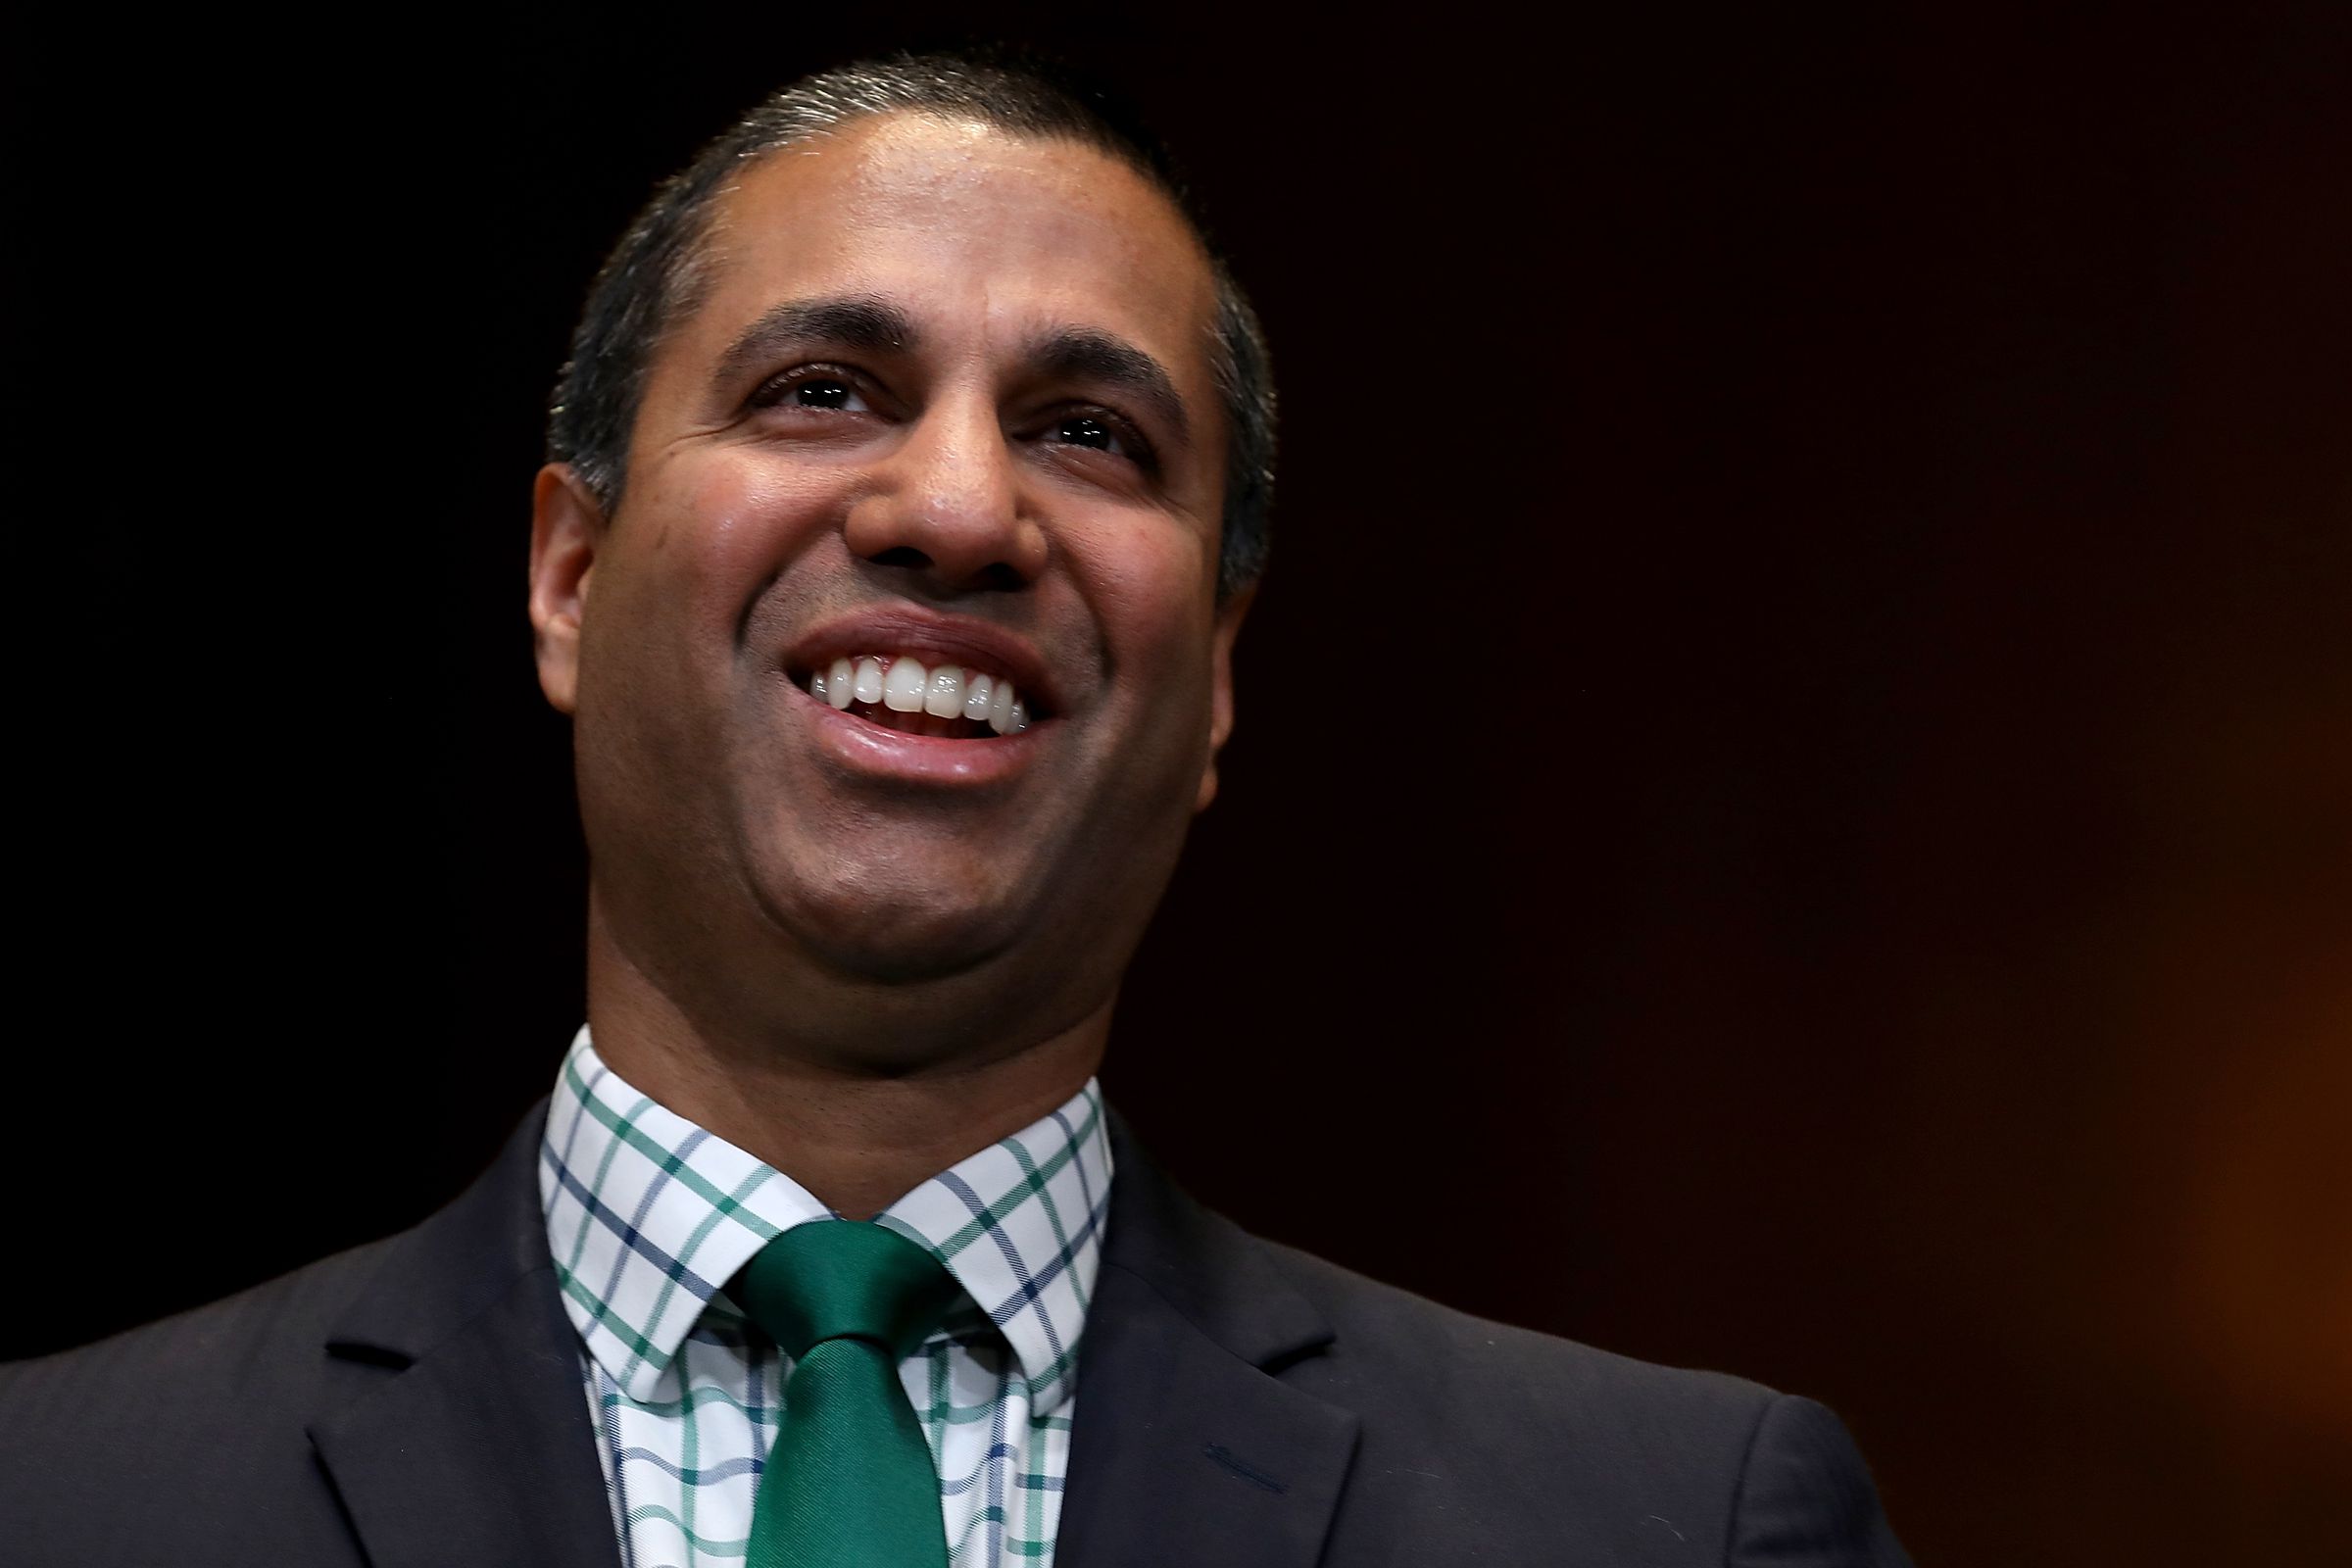 FCC Chairman Ajit Pai And FTC Chairman Joseph Simons Testify To Senate Appropriations Committee Hearing On Their Dept.’s Budget